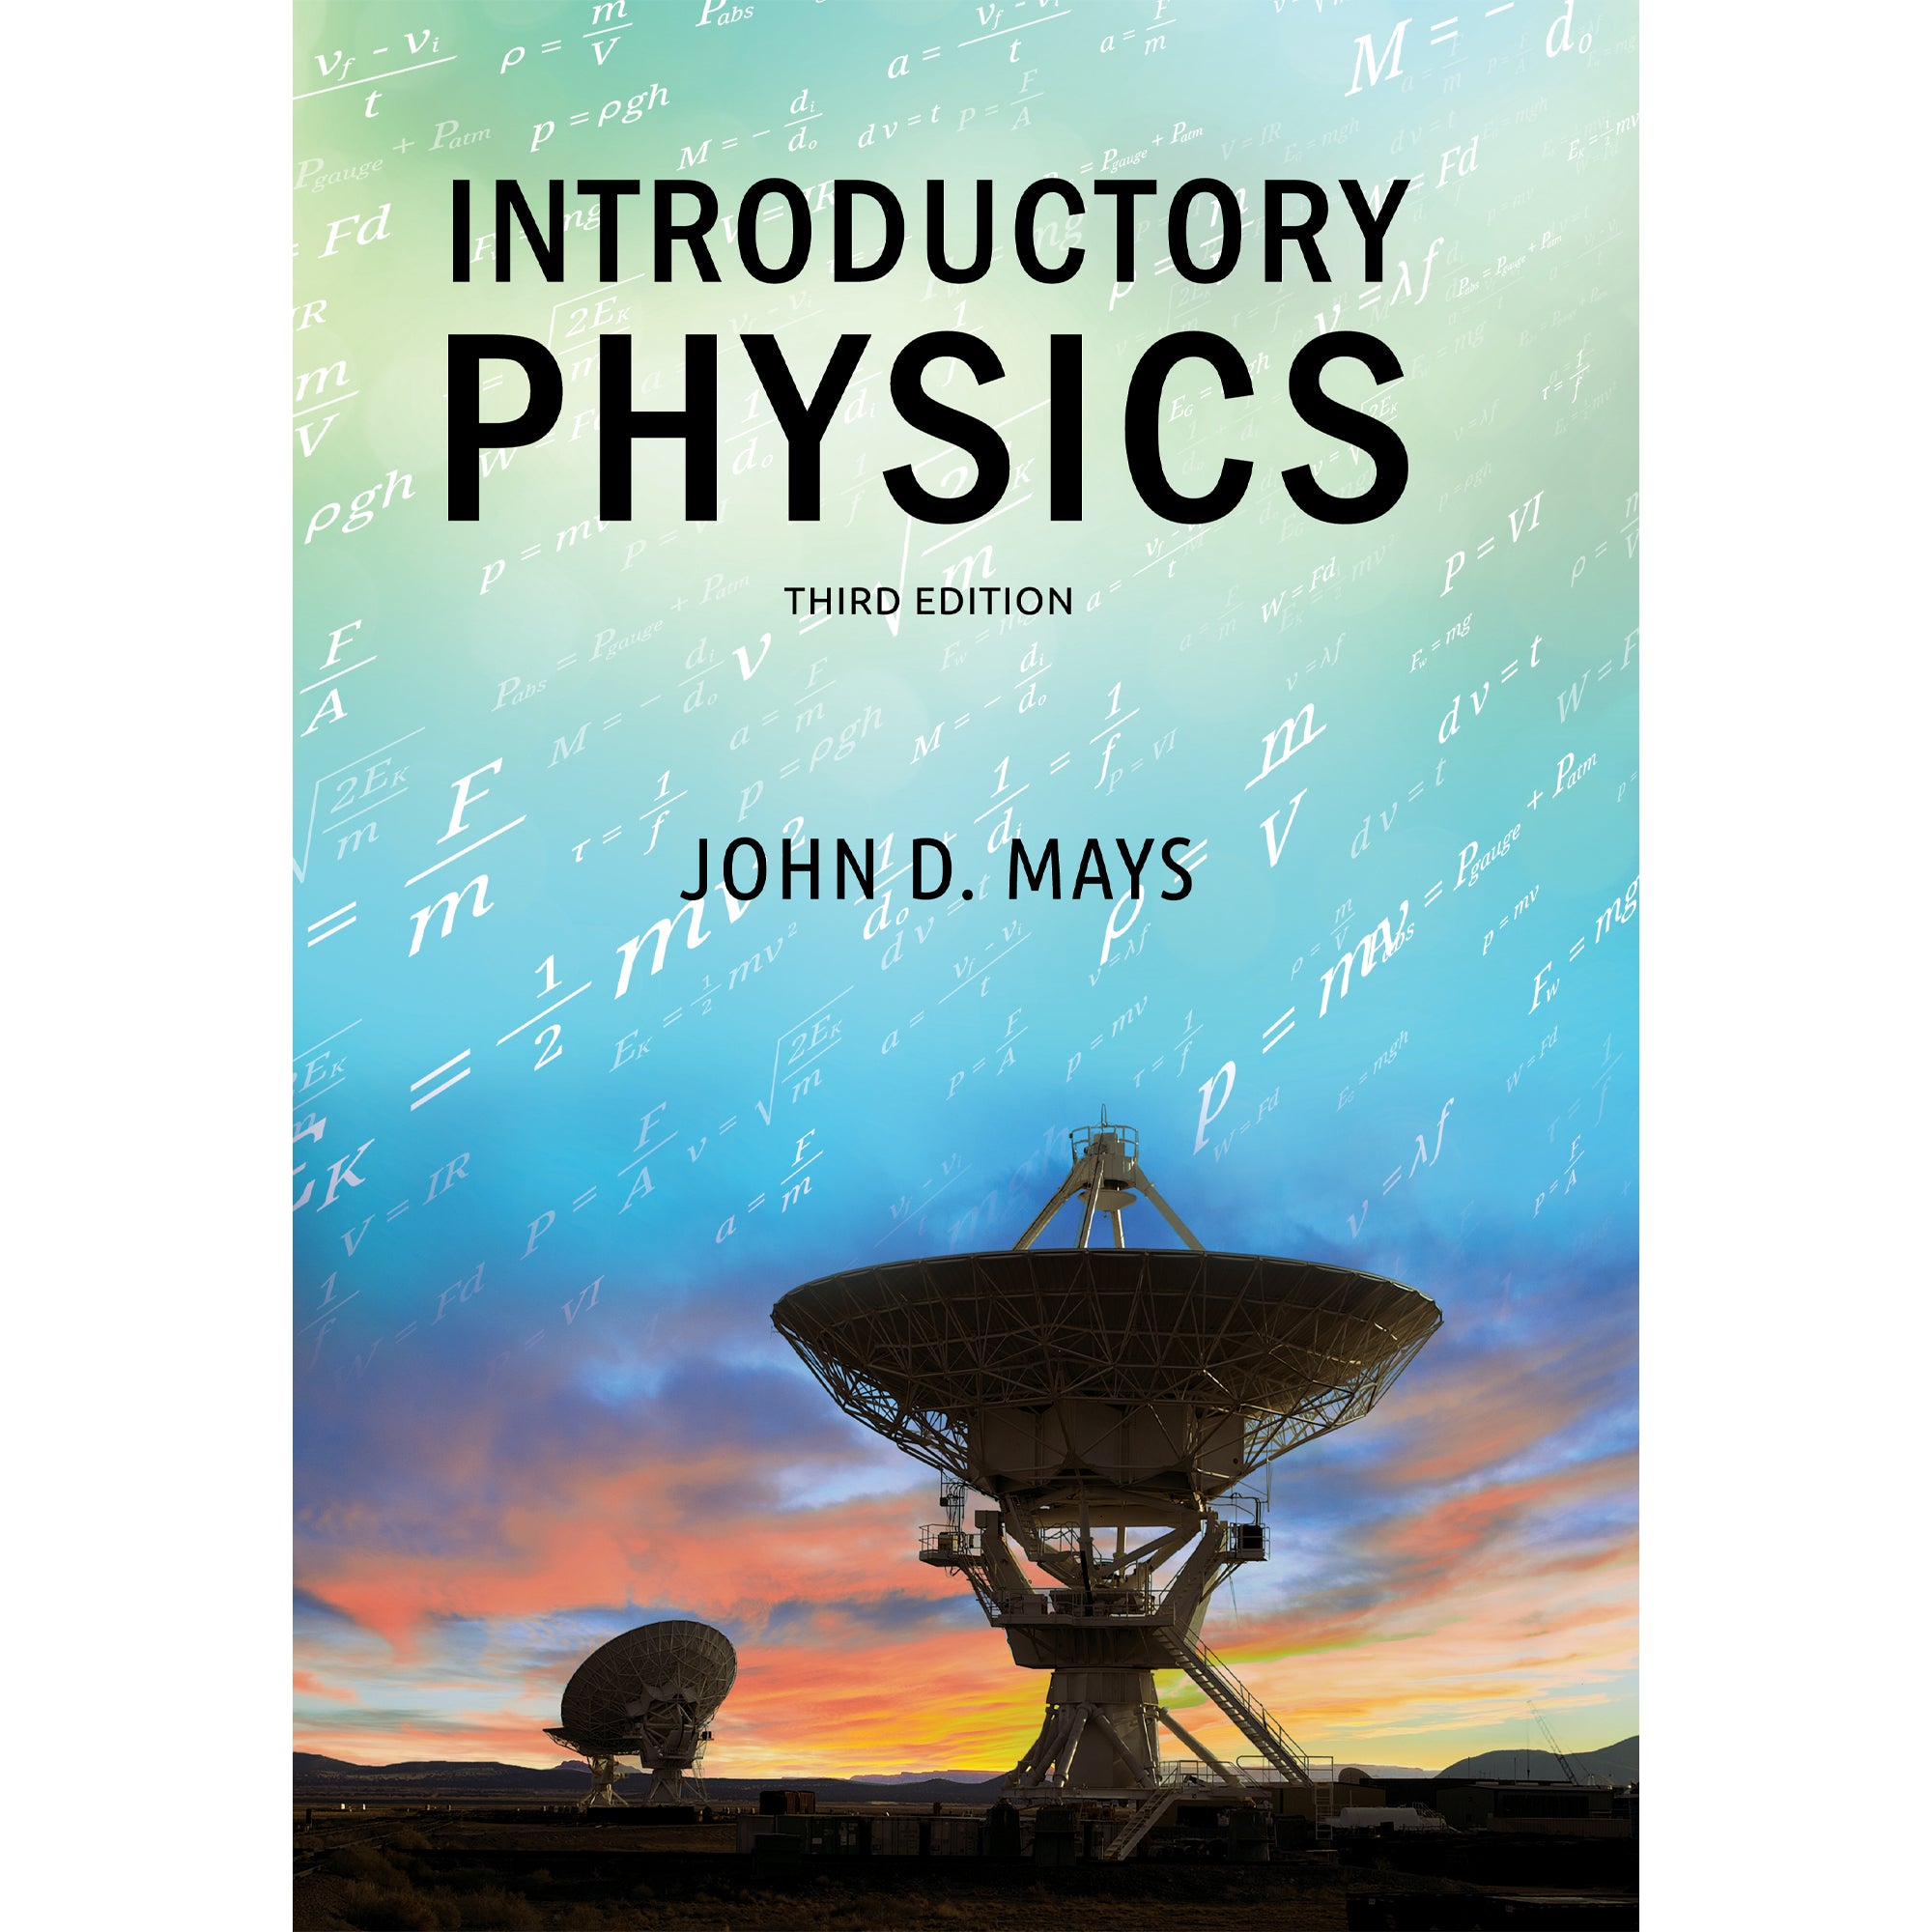 Introductory Physics cover. Image background is of a sunset with 2 large satellite dishes and in the sky shows different formulas in white. Authored by John D. Mays.